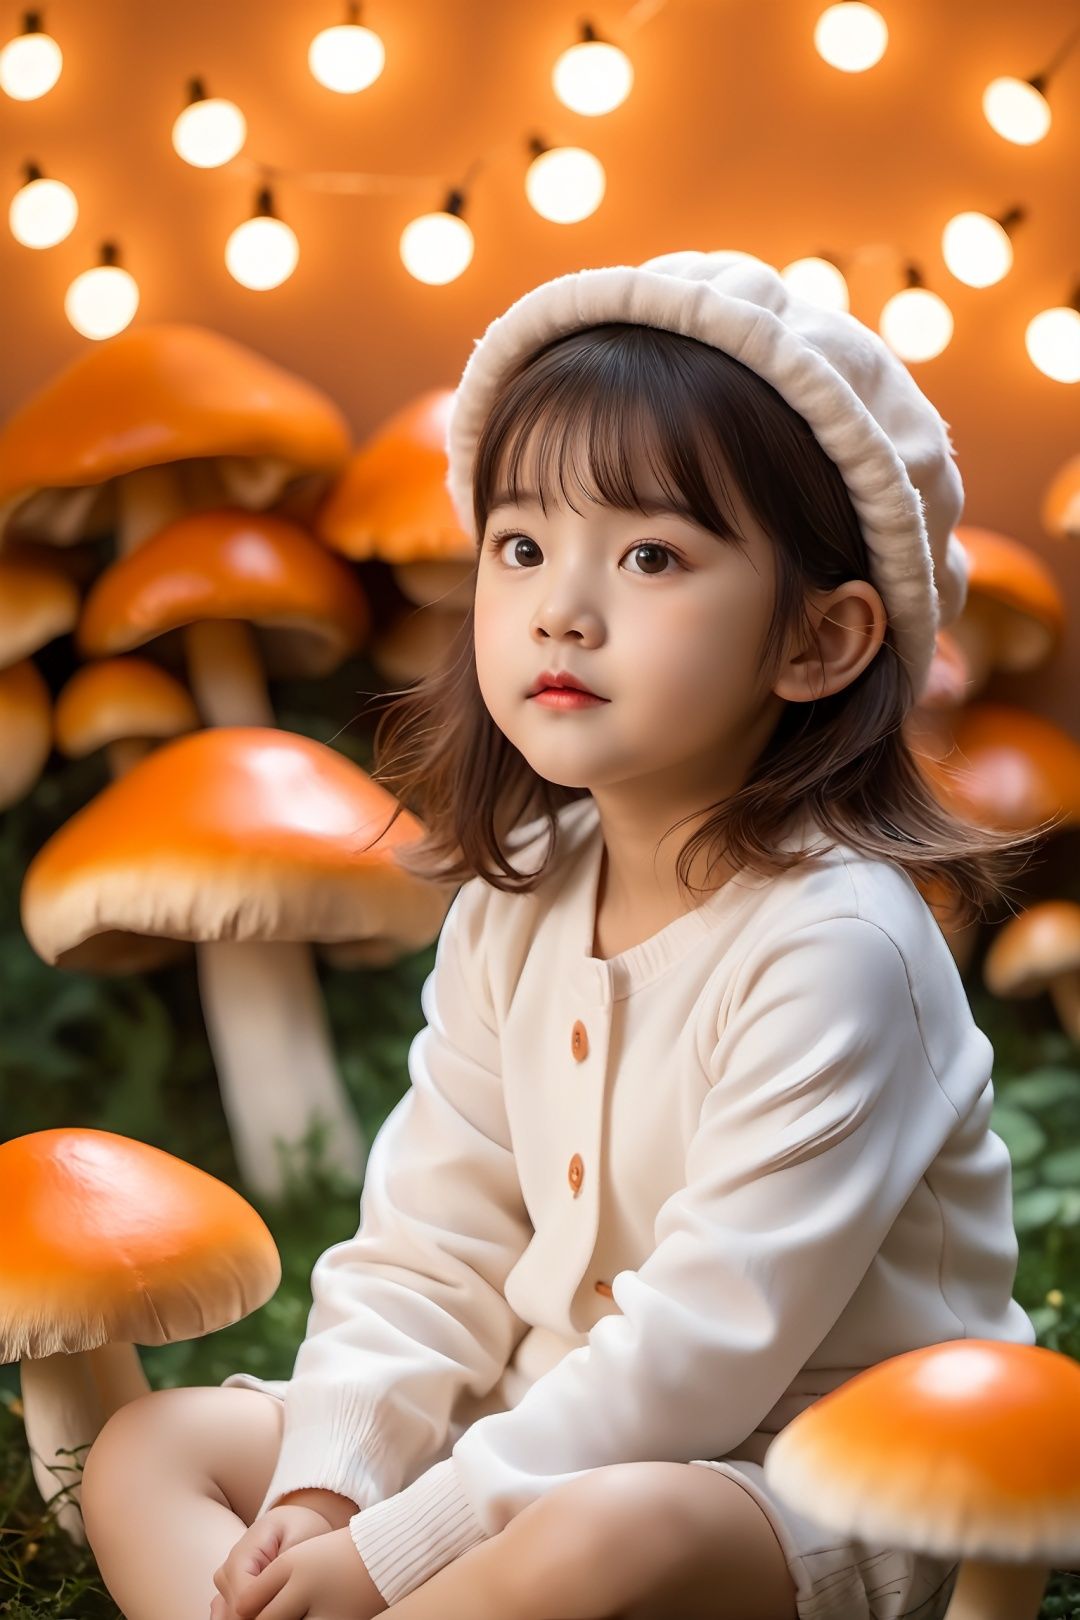  the little girl sitting in front of mushrooms with lights in the background, in the style of yeong hao han, uhd image, dreamlike atmosphere, light white and orange, maximalism, color light, close up